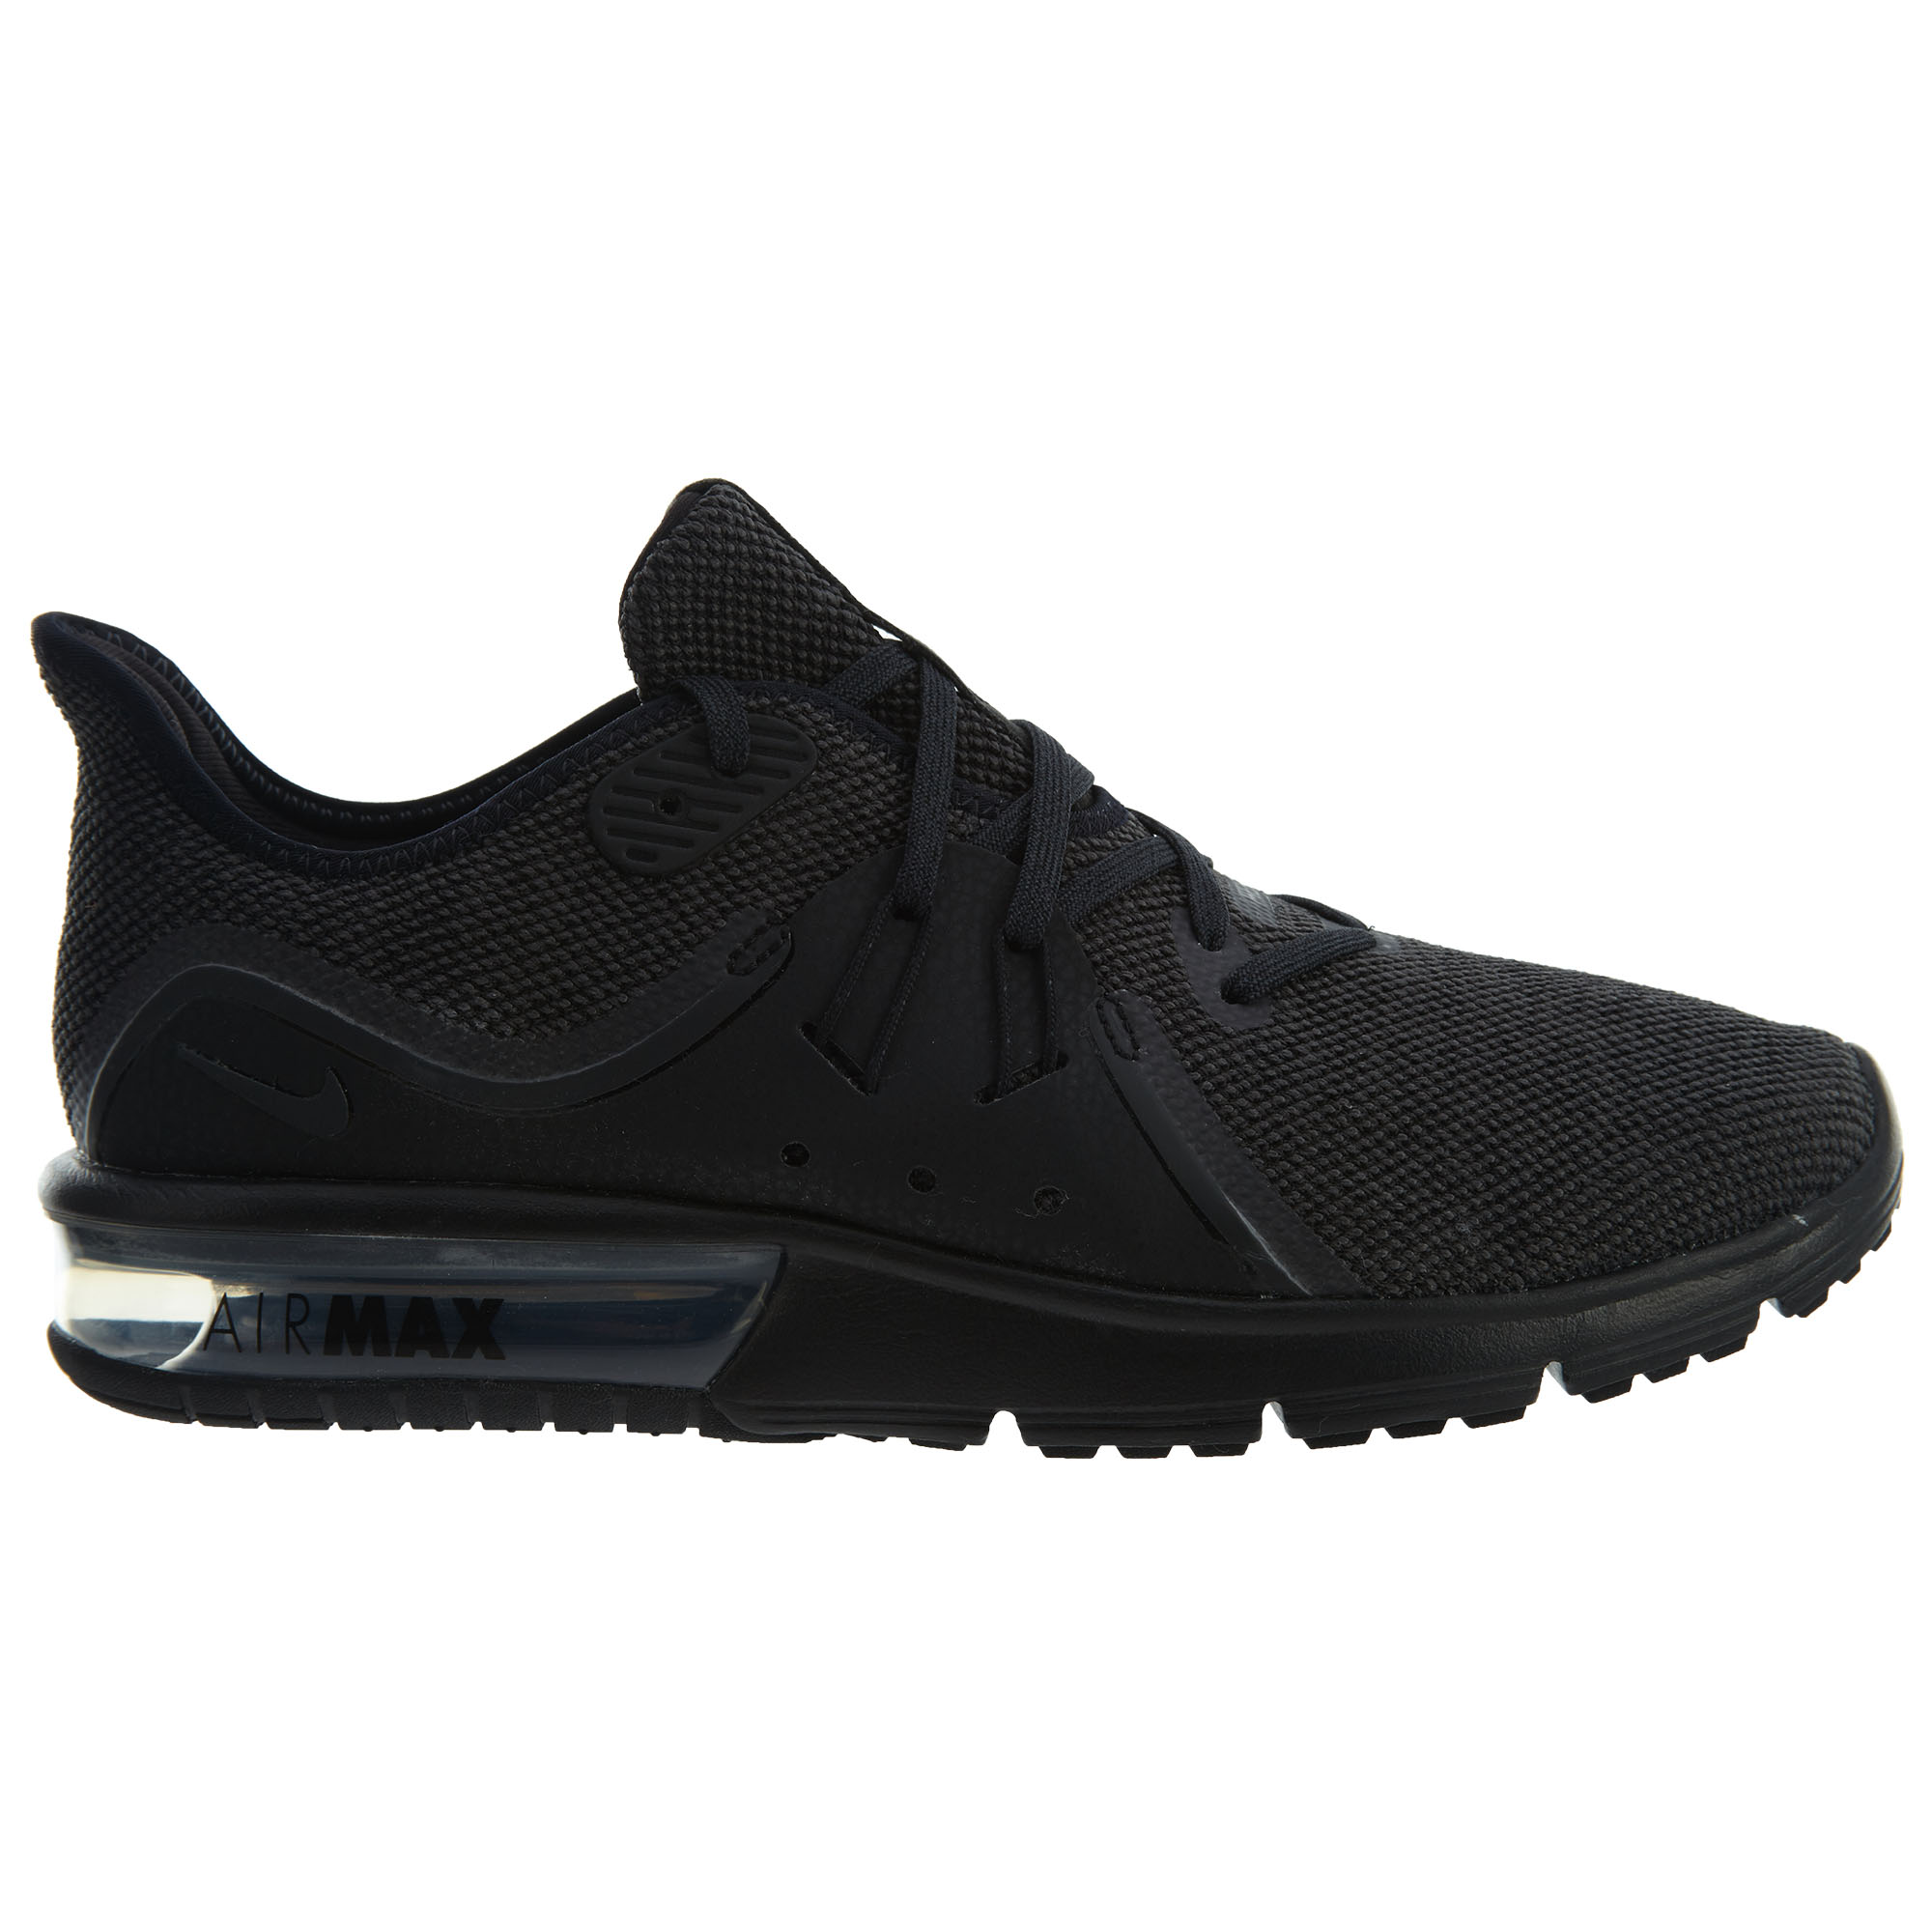 Nike Air Max Sequent 3 Black Anthracite - 921694-010